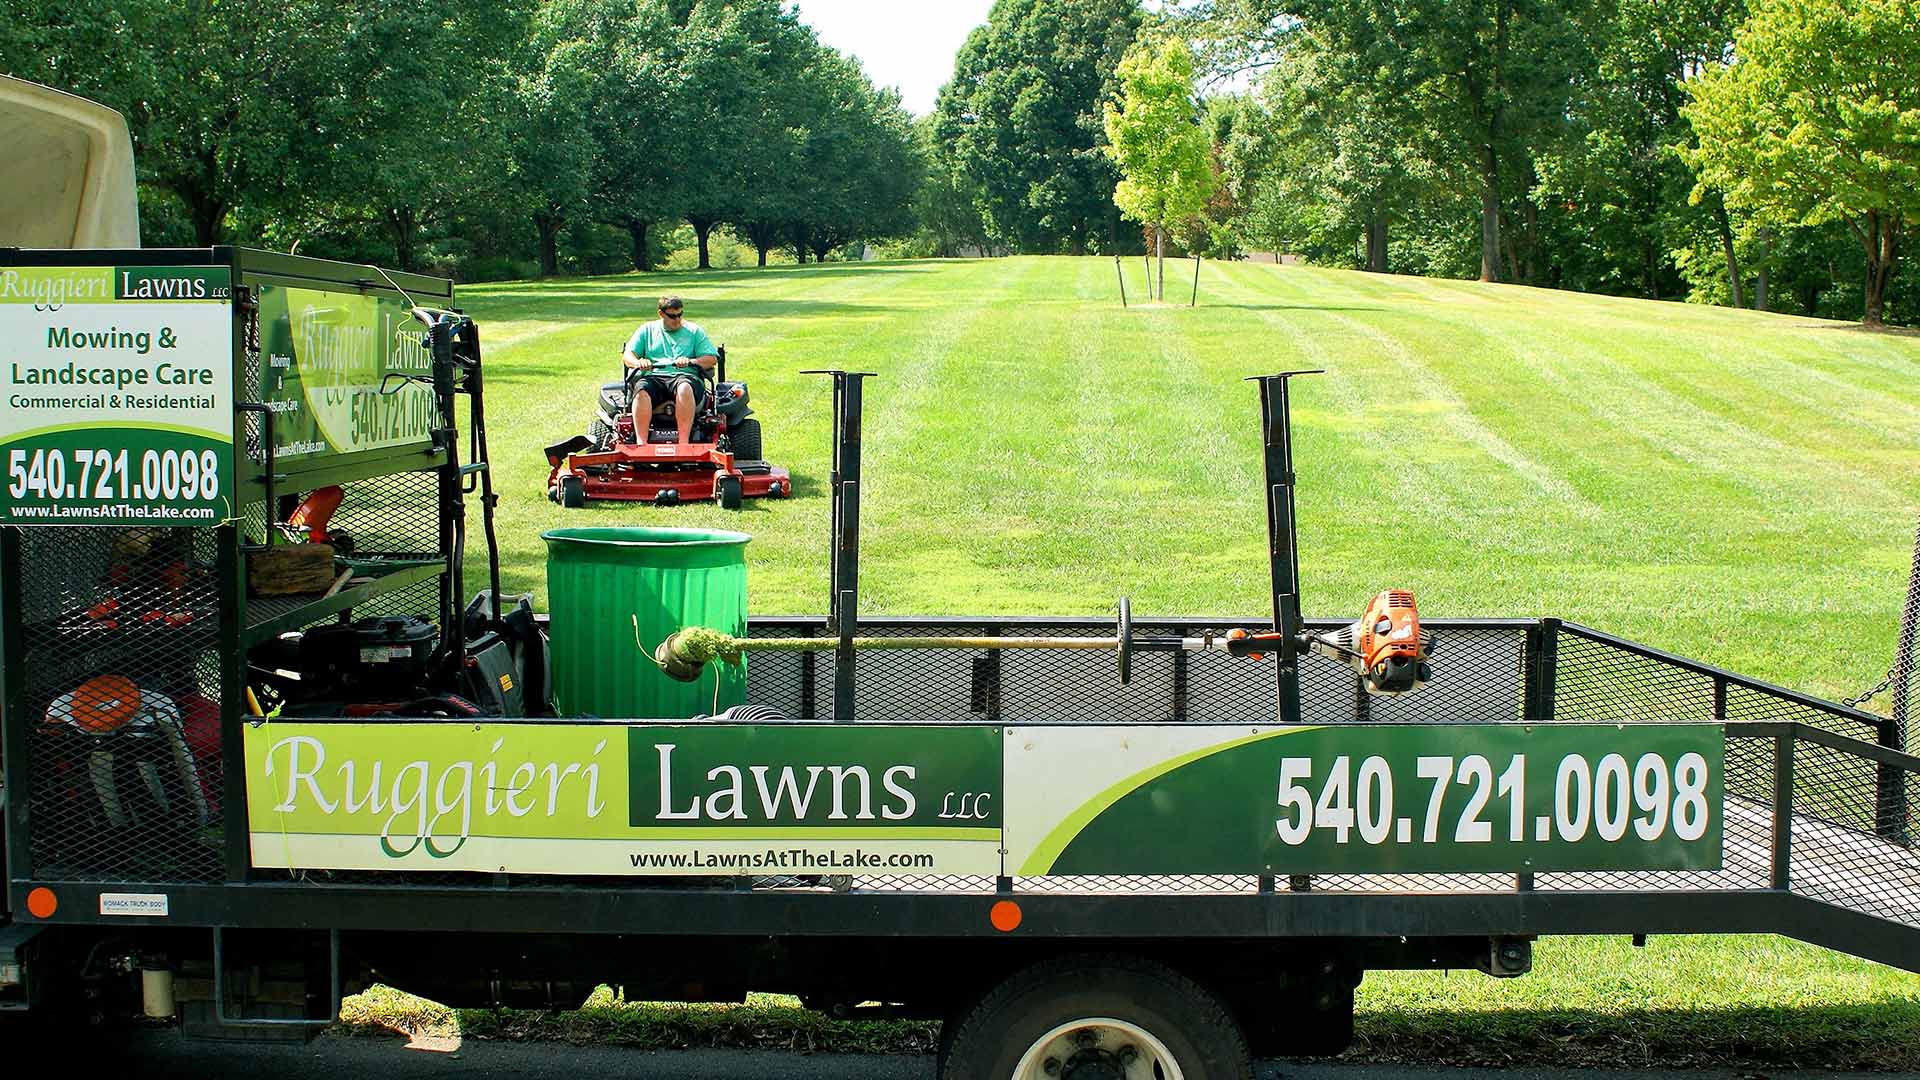 Ruggieri Lawns LLC Mulching Services, Lawn Mowing Service and Trimming Shrubs slide 1